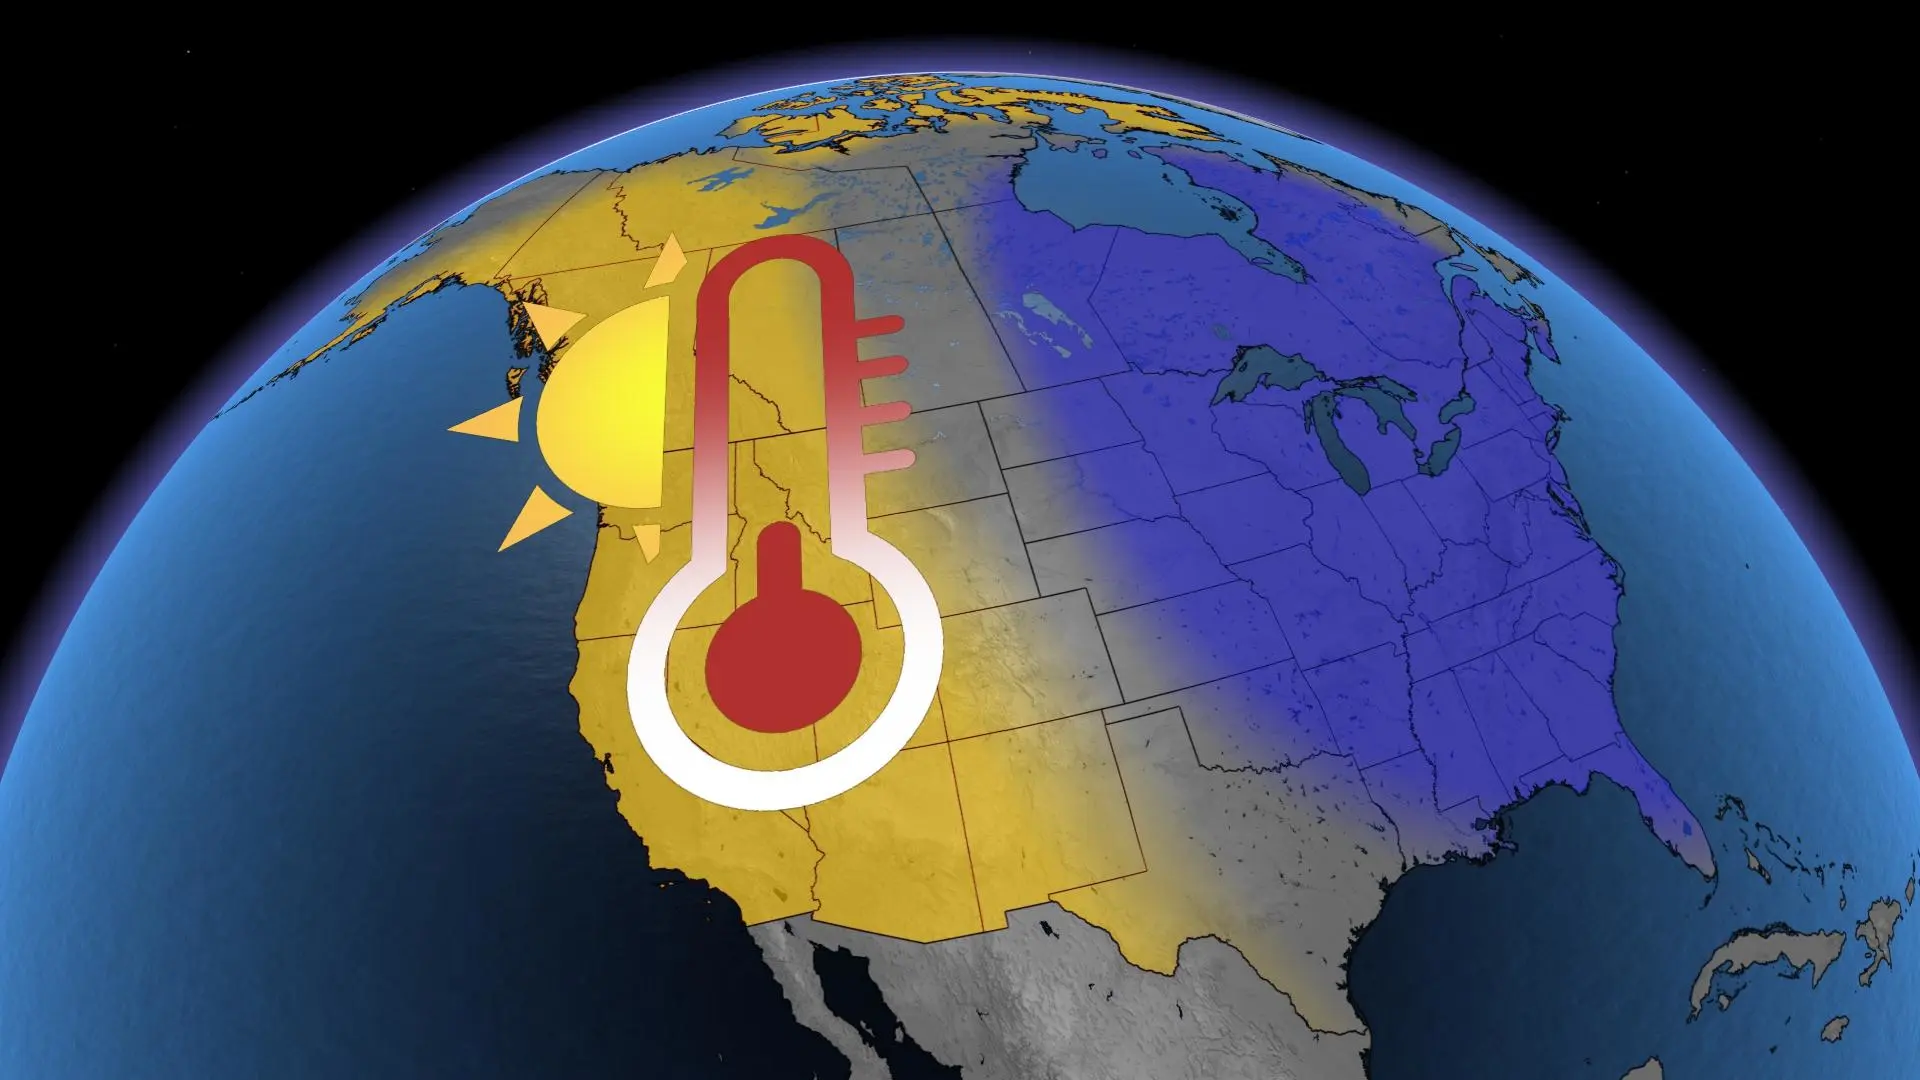 Major temperature swap underway in Canada, West sees warmth as the East cools